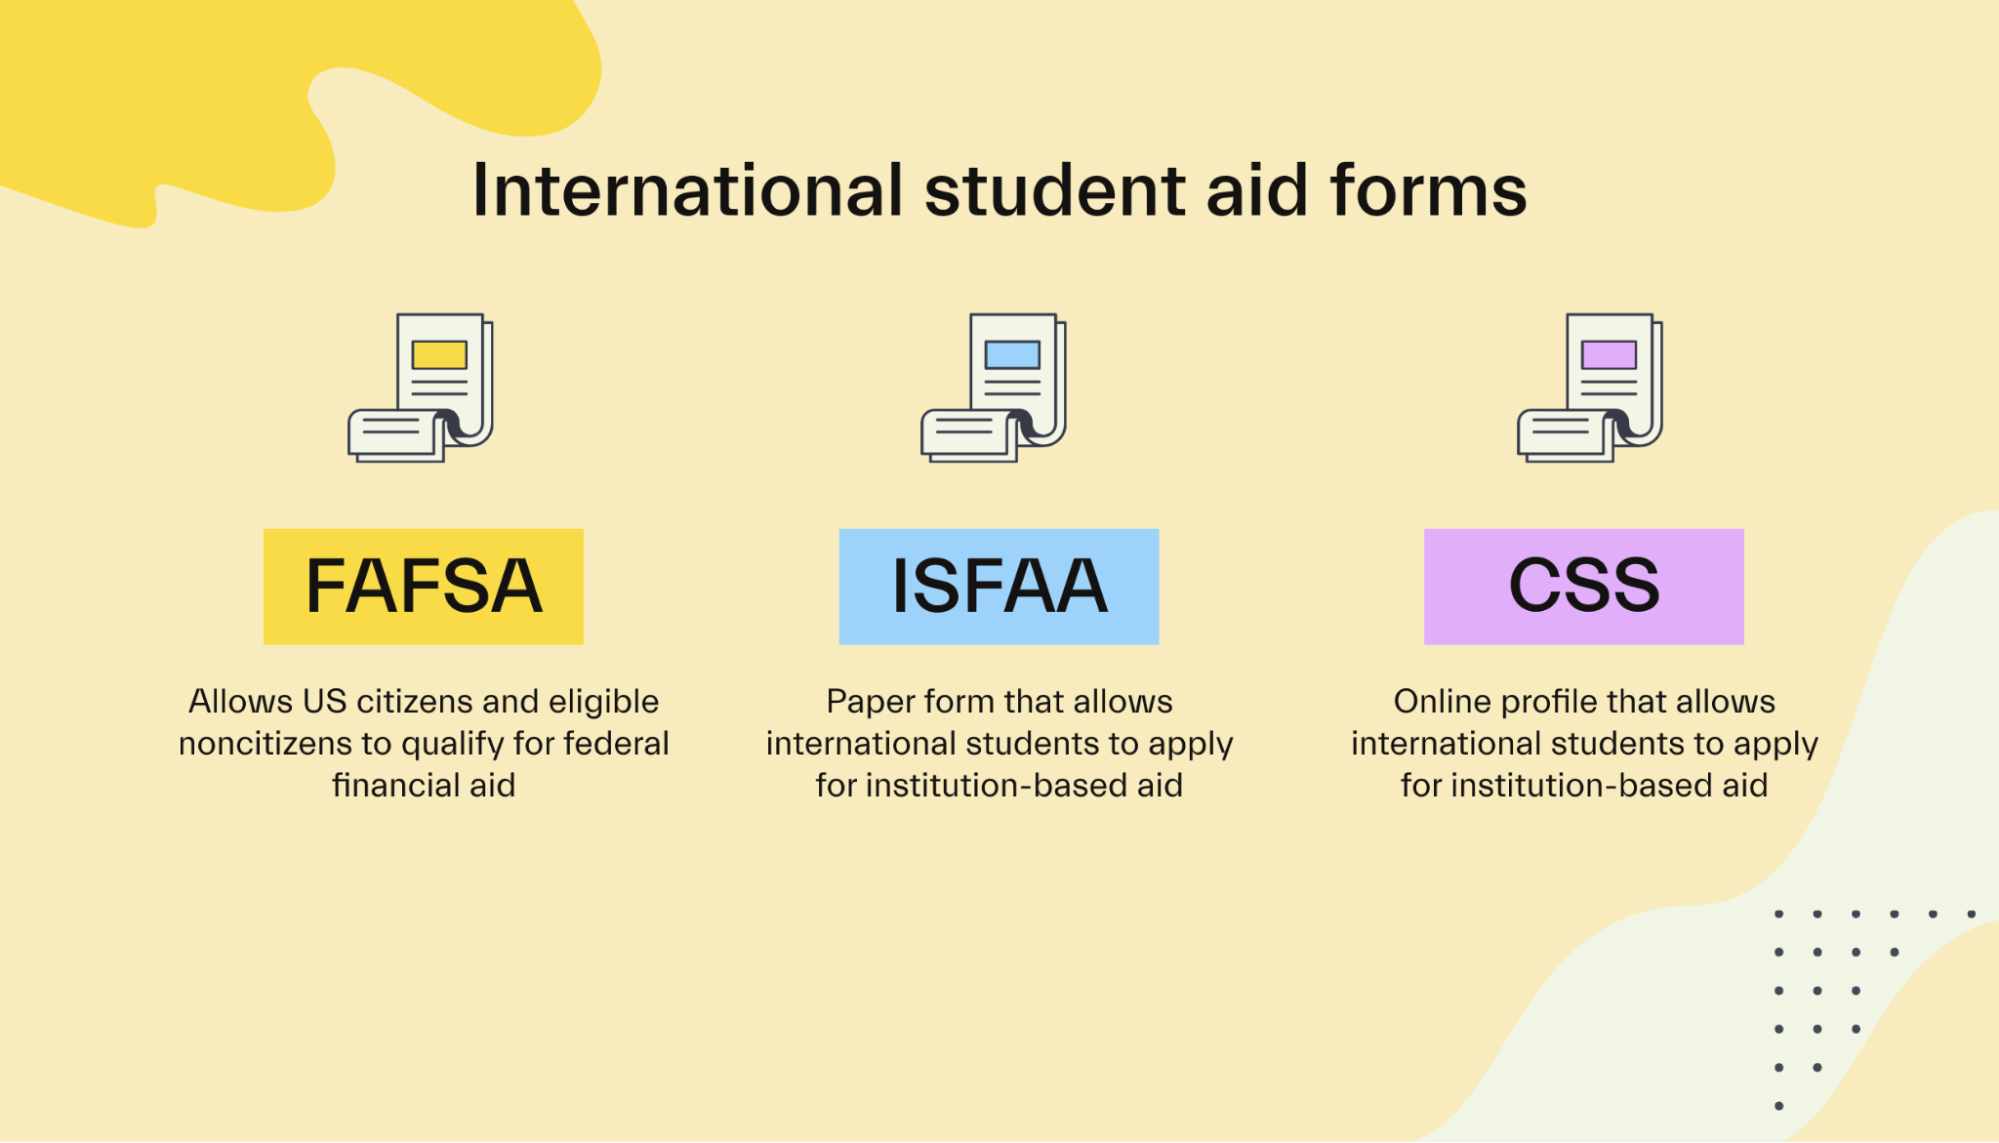 International student aid forms